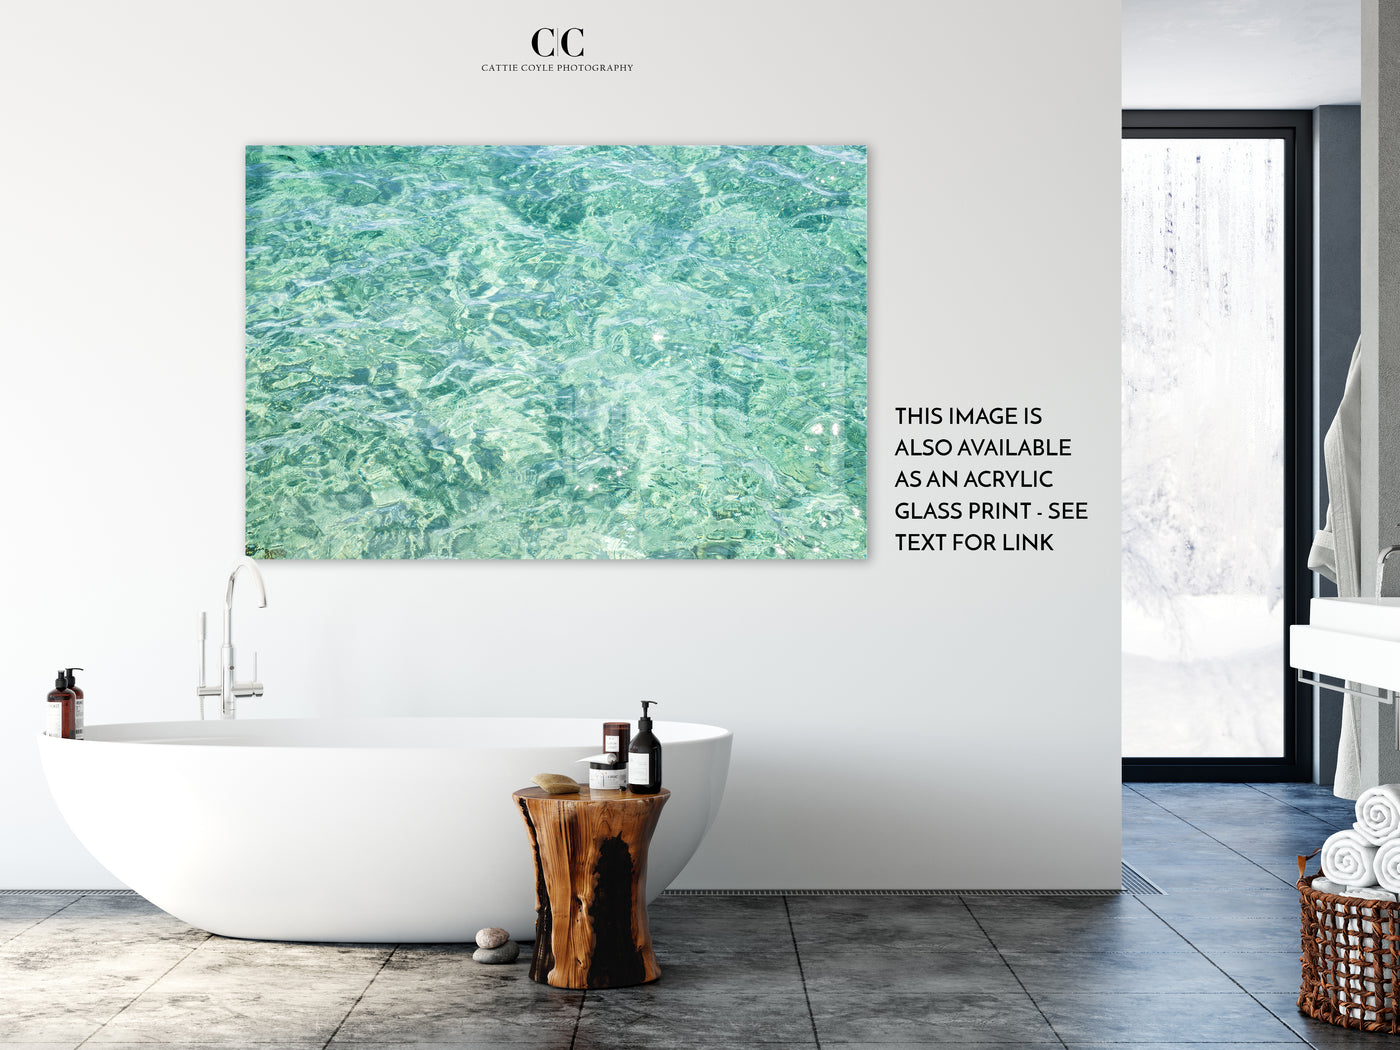 Abstract Water - Large acrylic glass print by Cattie Coyle Photography above bathtub